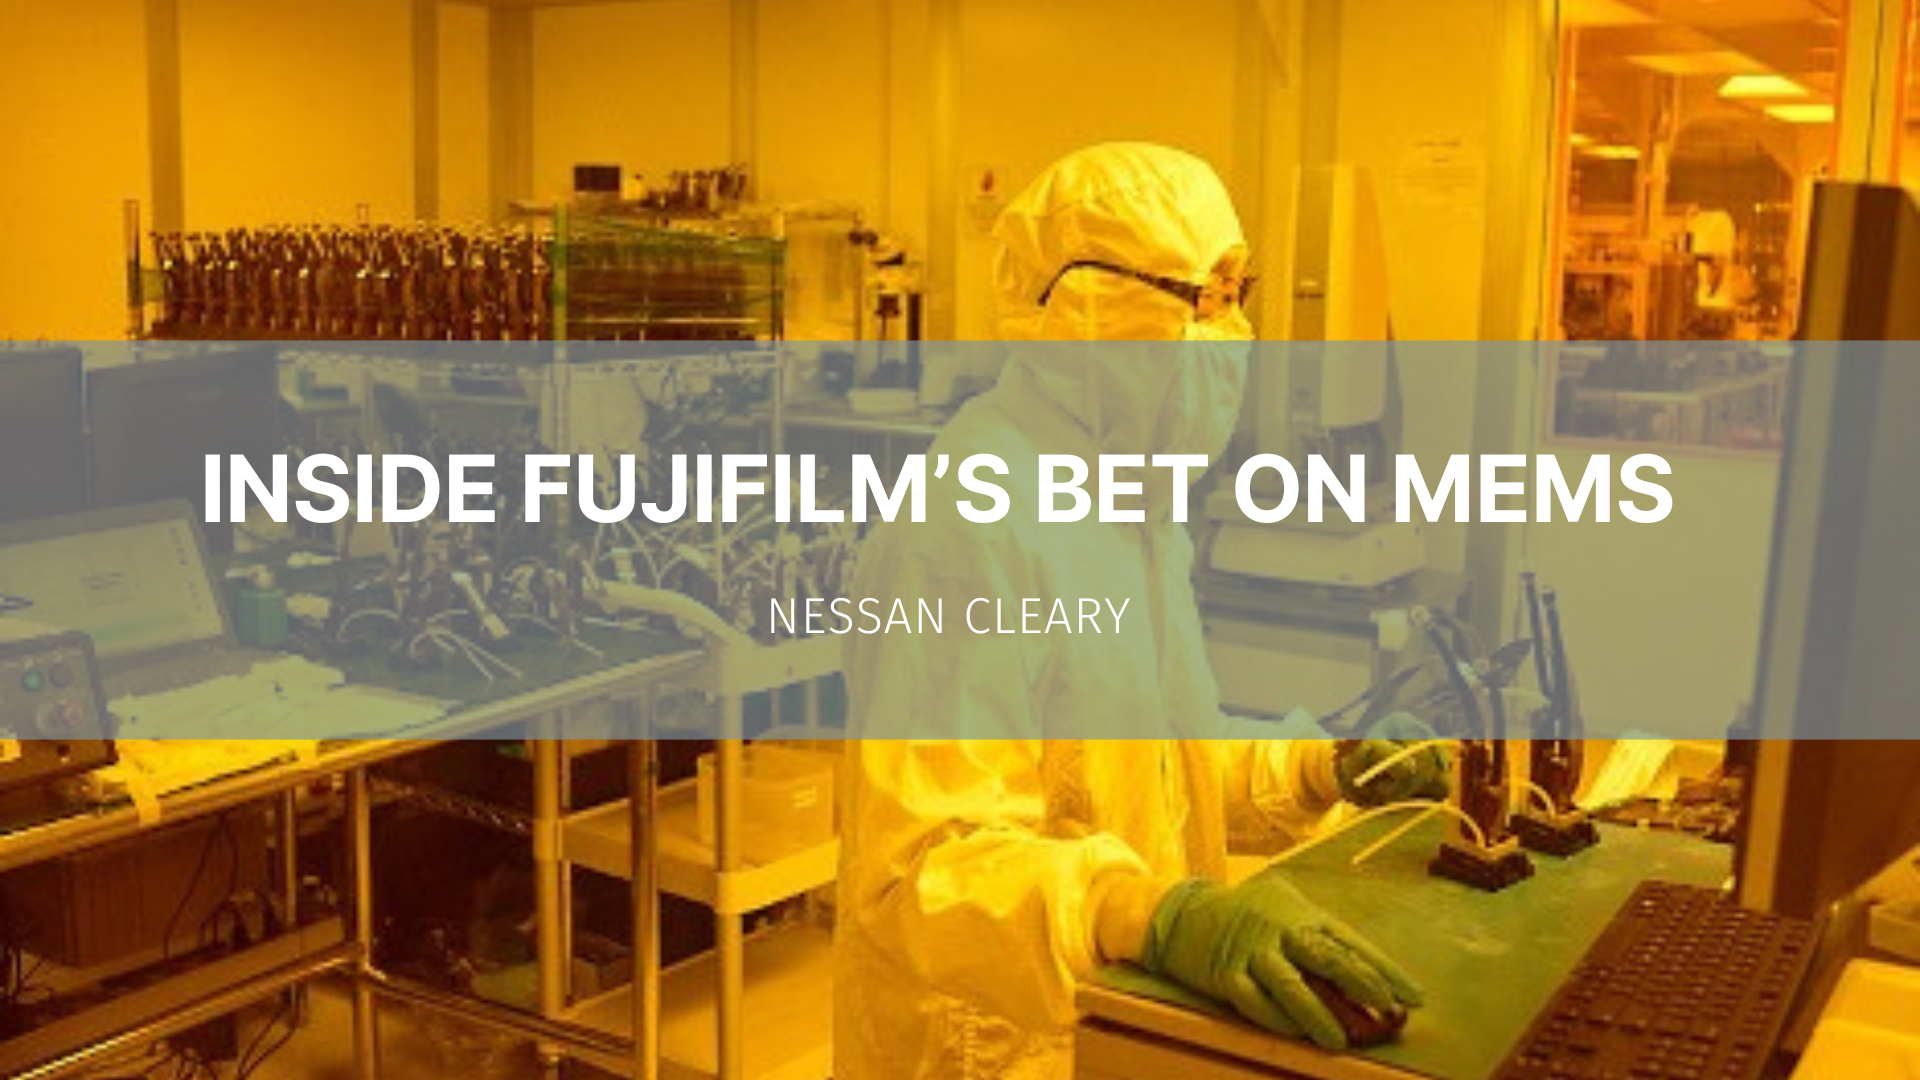 Featured image for “Inside Fujifilm’s bet on MEMs ”